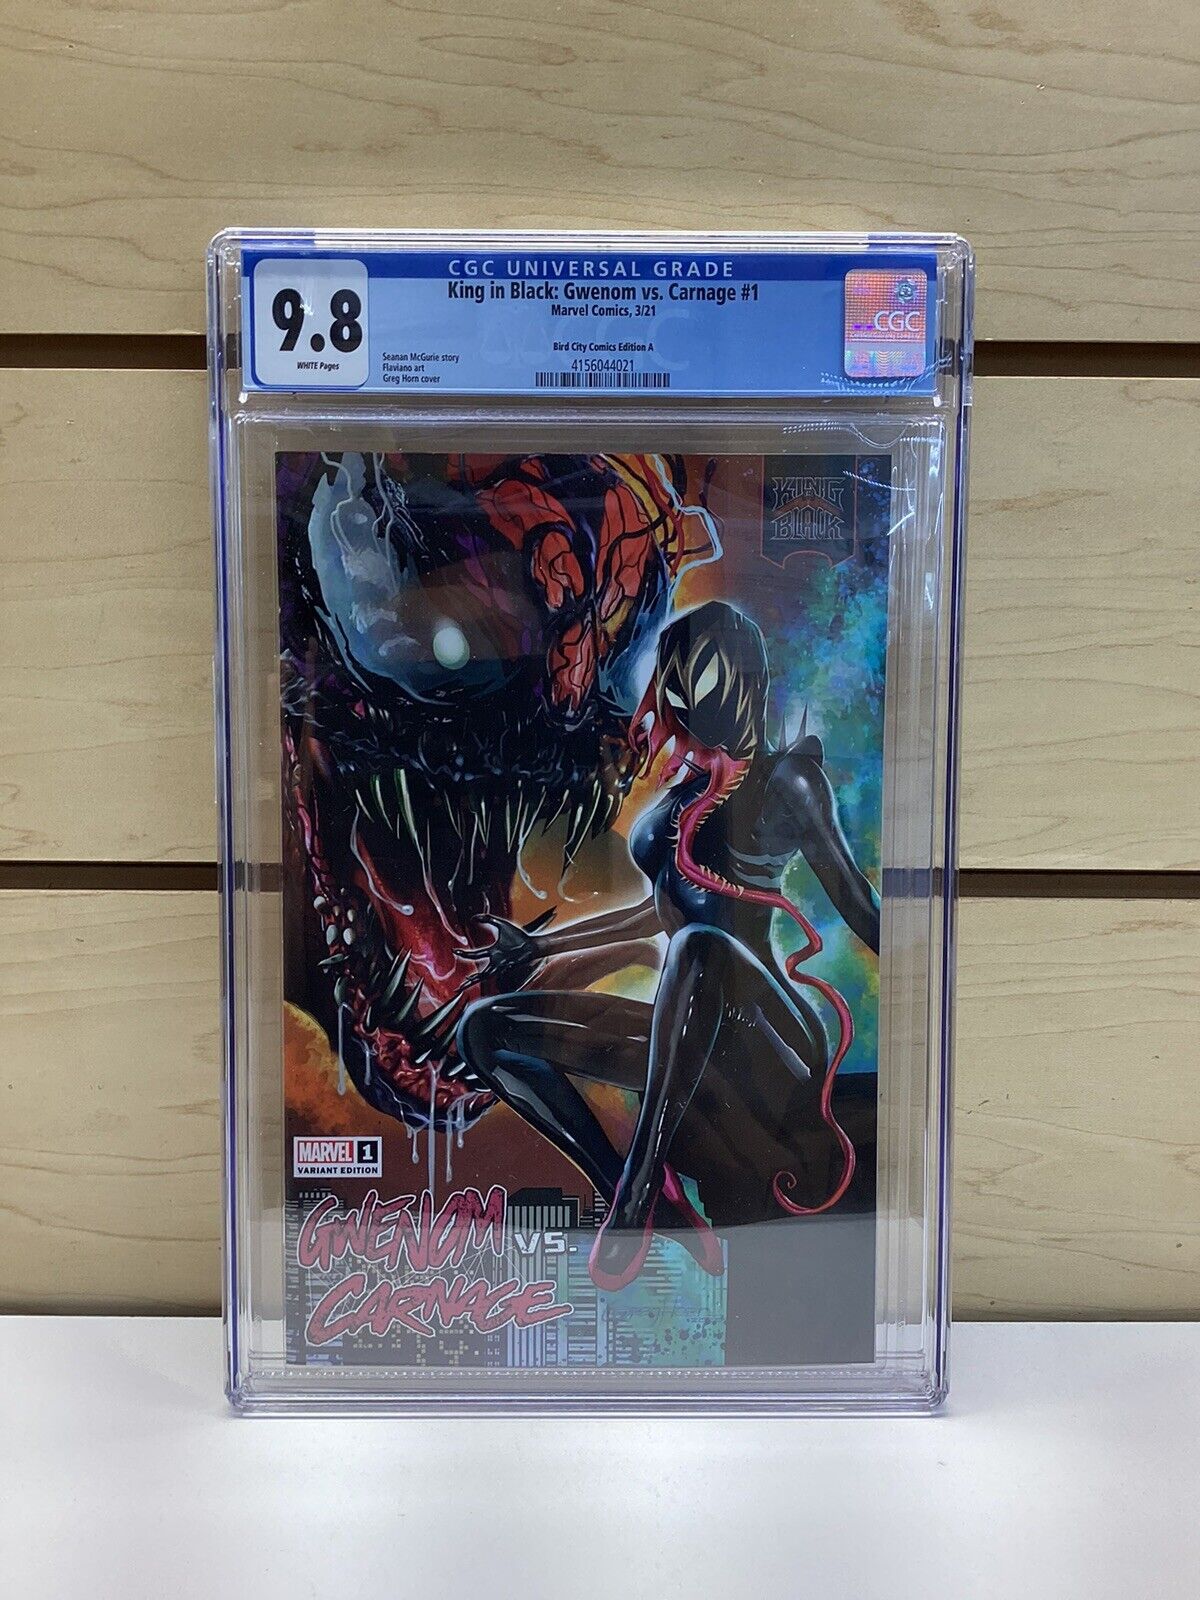 King in Black Gwenom vs Carnage 1 CGC 9.8 Bird City Variant A Greg Horn Cover